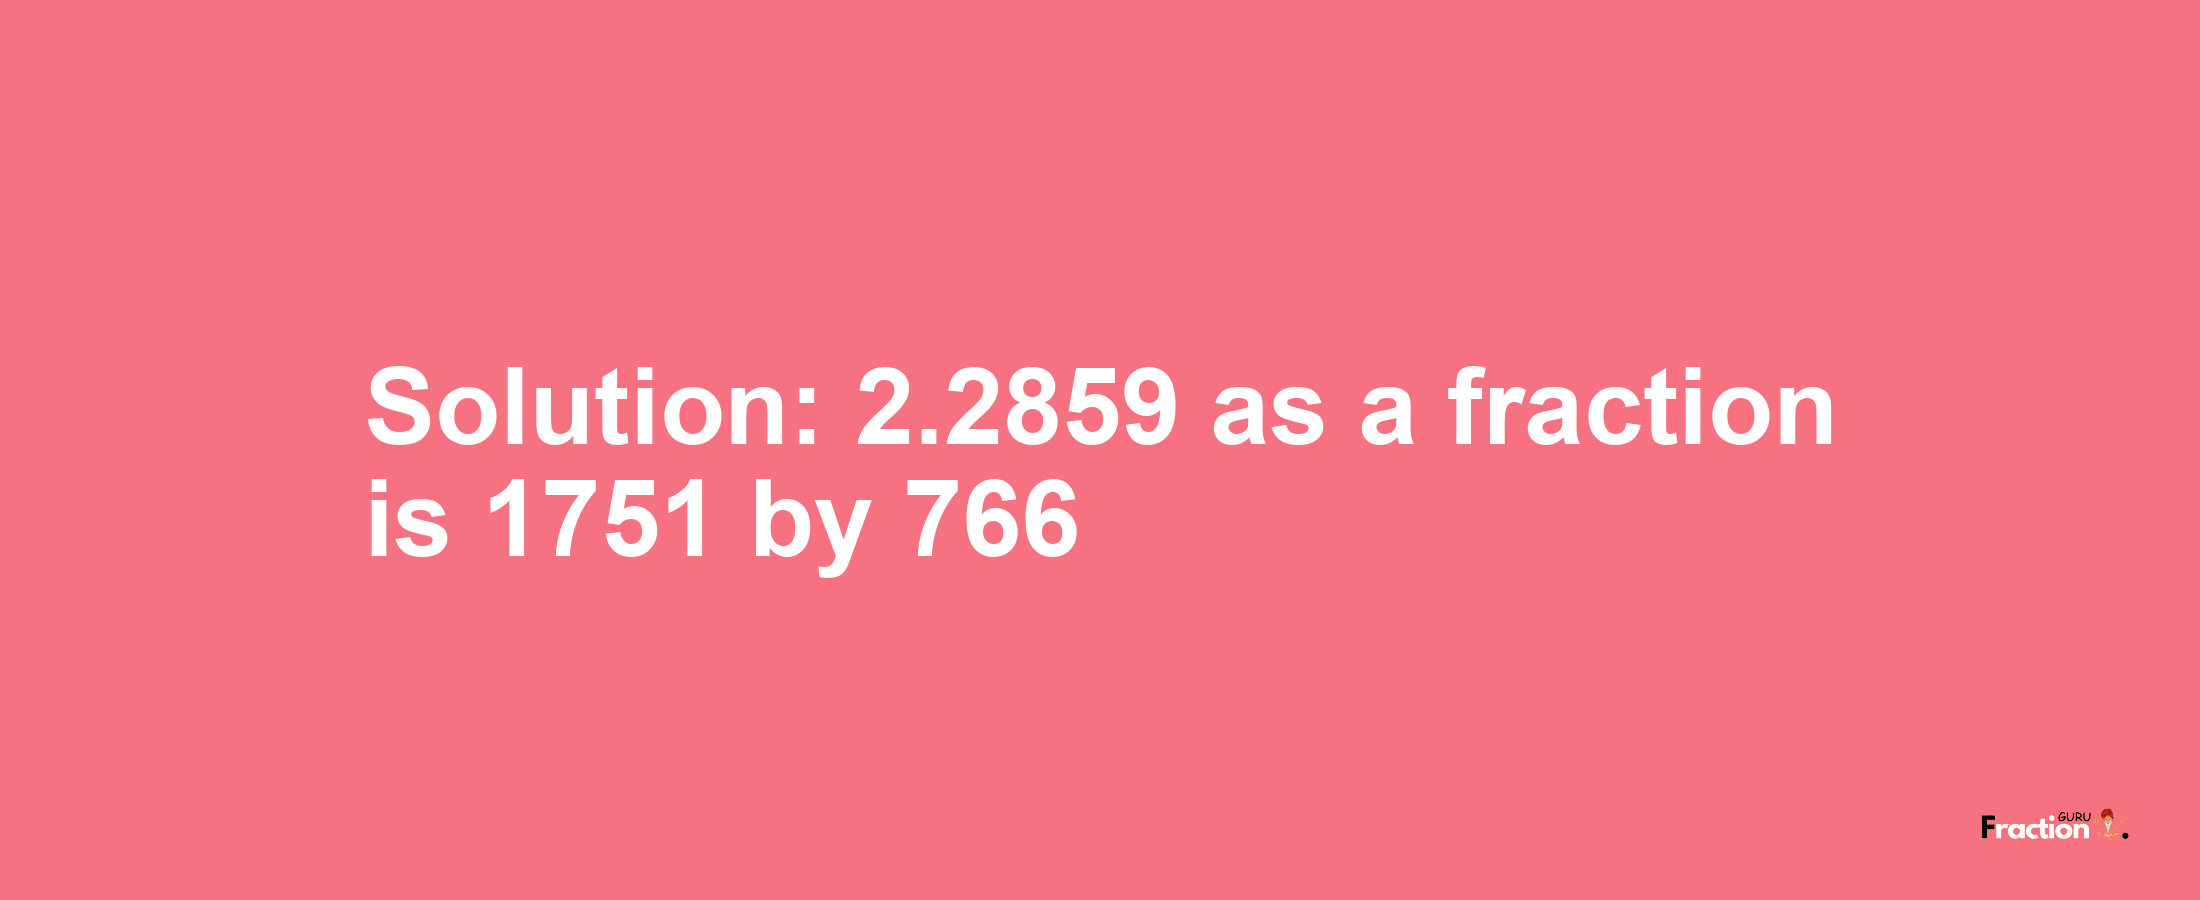 Solution:2.2859 as a fraction is 1751/766